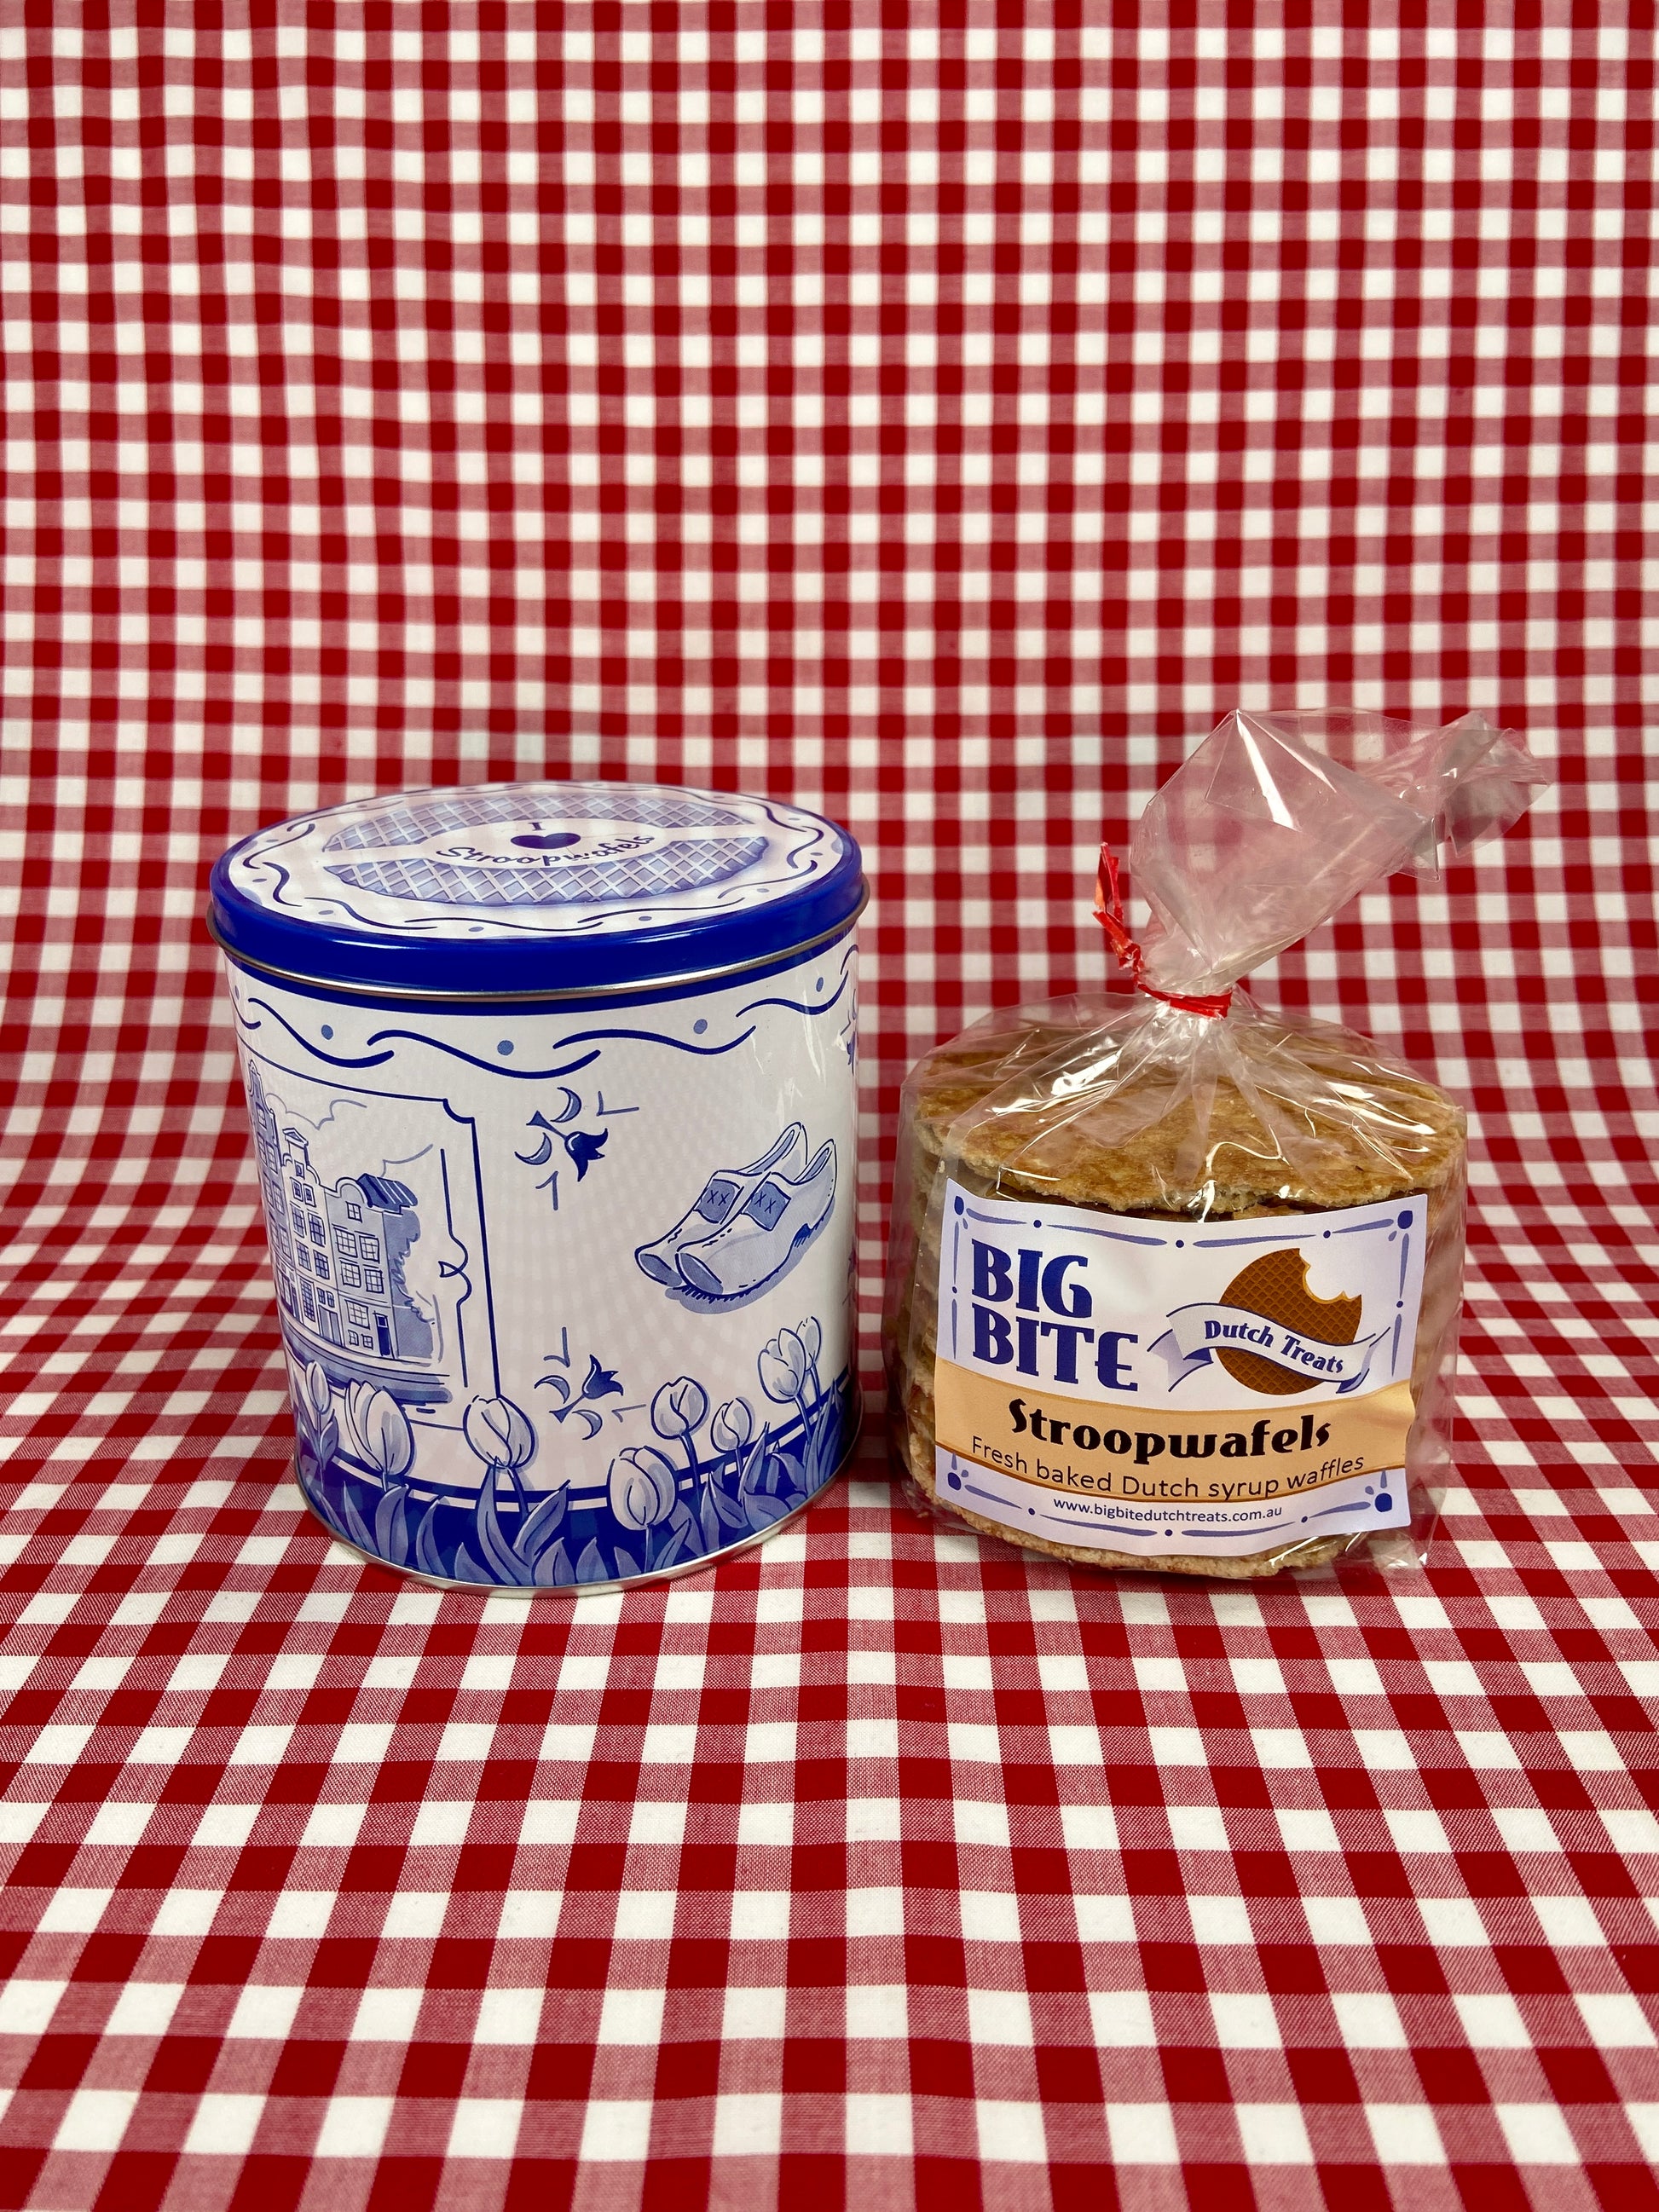 Dutch Delft blue tin with text I love stroopwafels and a pack of Dutch syrup waffles - Big Bite Dutch Treats